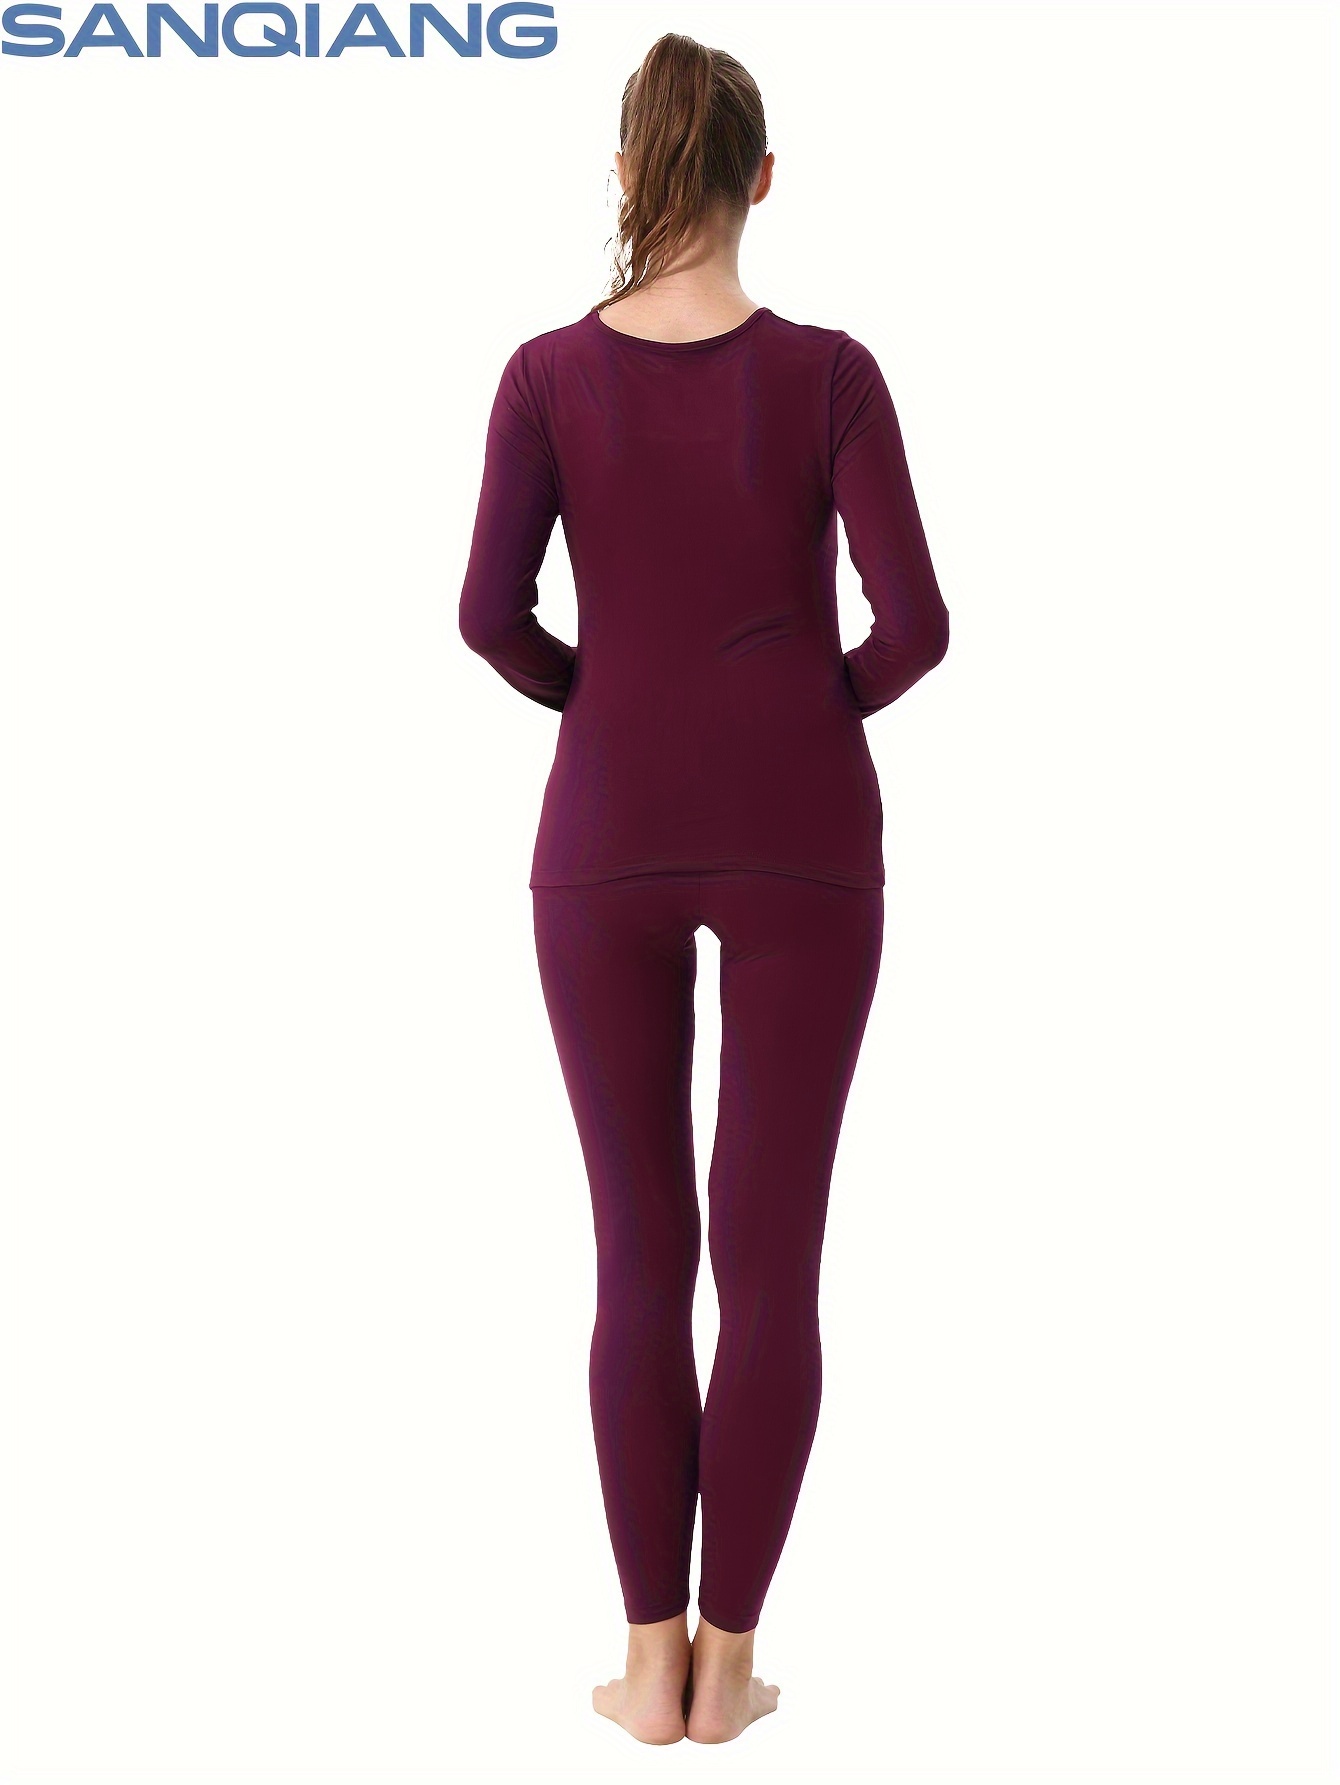 Thermal Underwear for Petite Women -  Canada